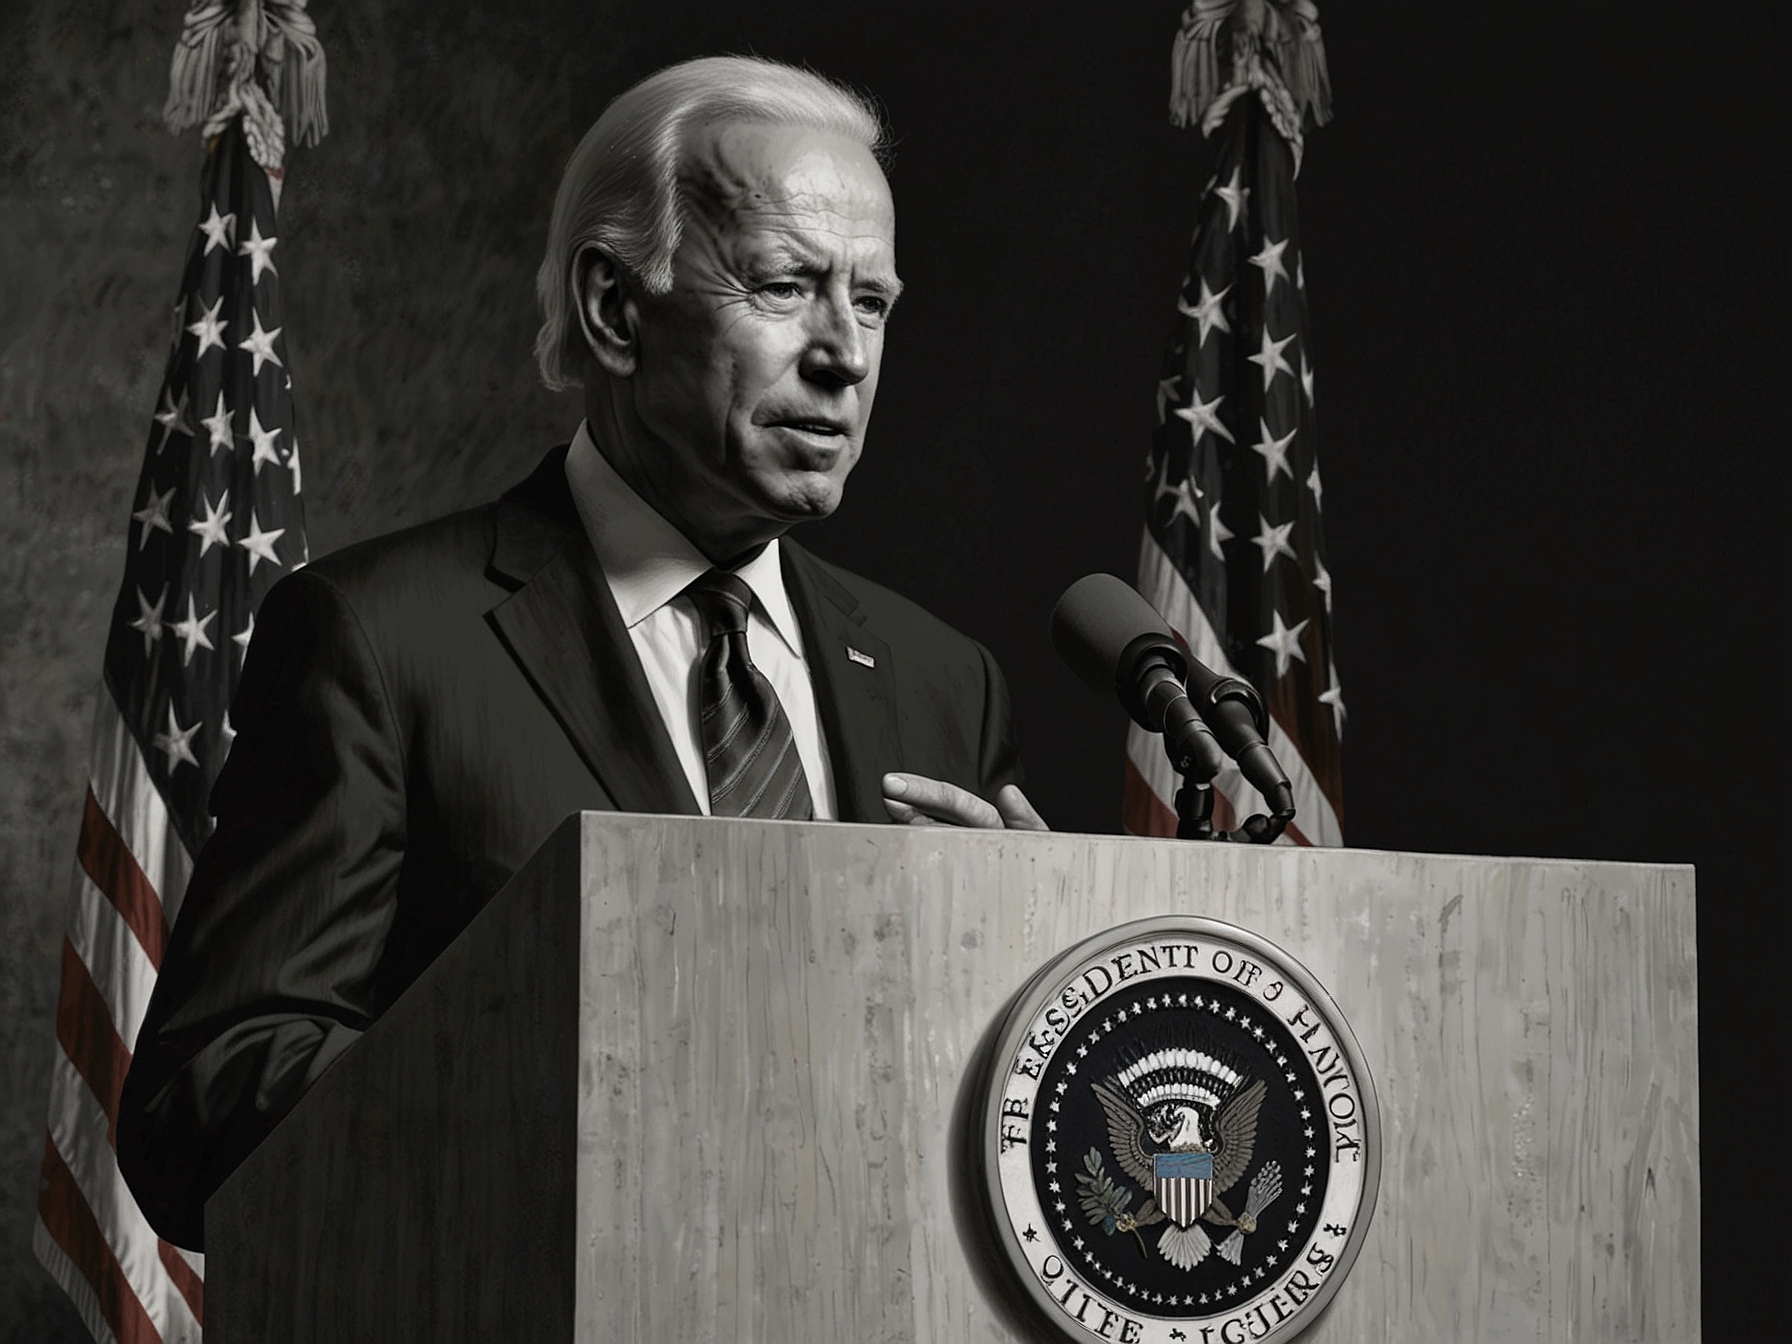 An image depicting President Biden speaking at a podium, emphasizing his new compassionate immigration relief measures aimed at providing stability for undocumented immigrants.